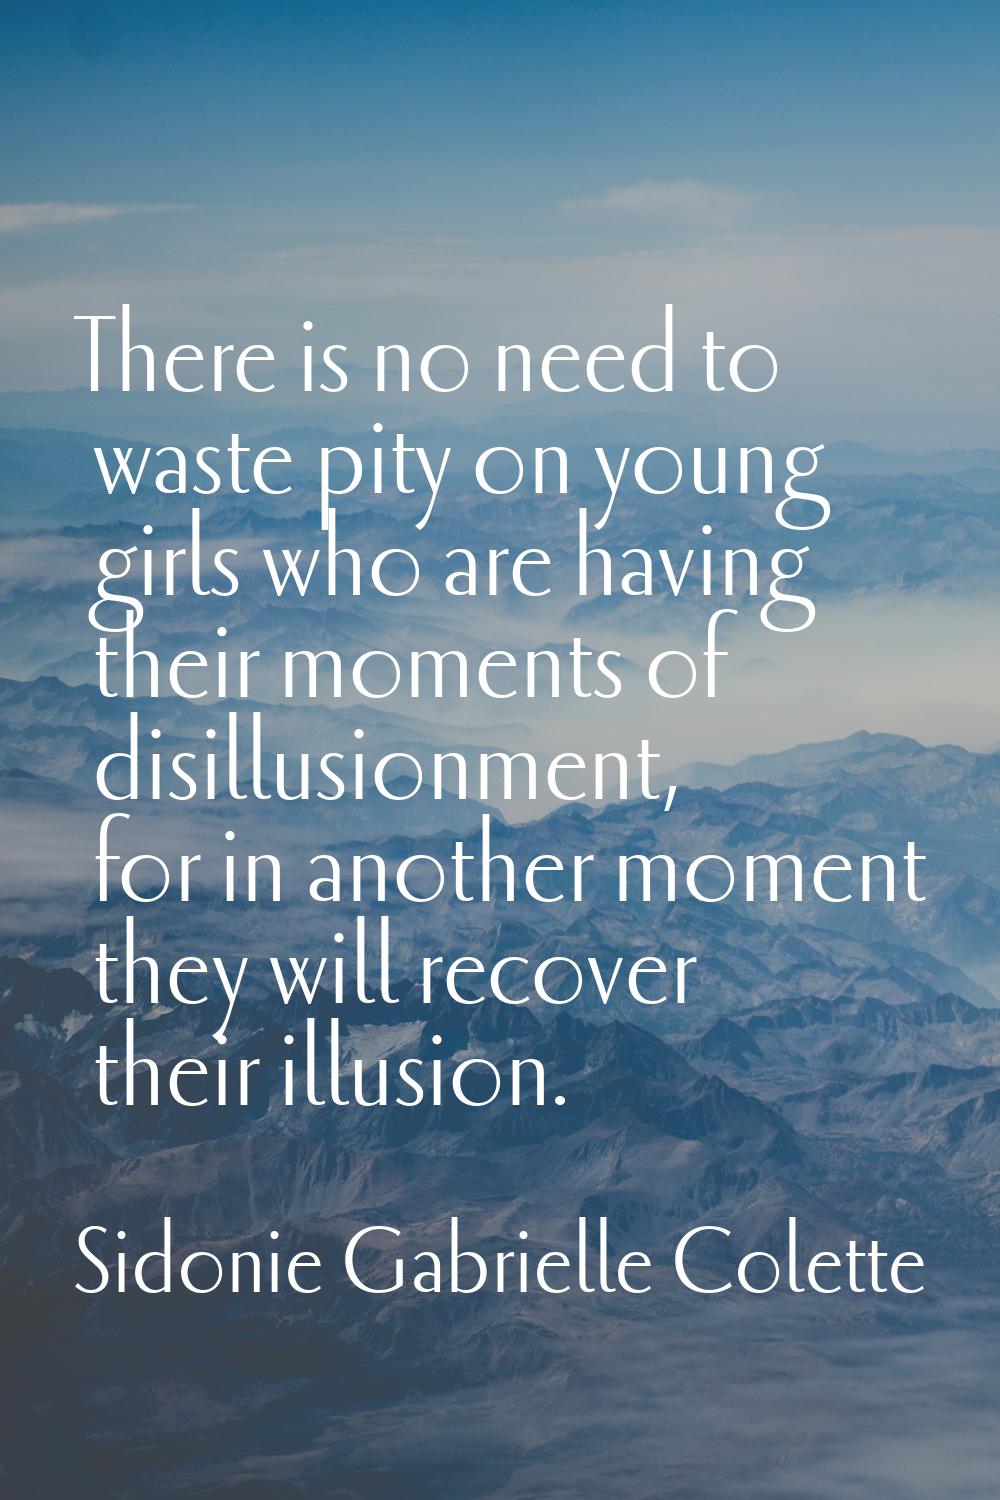 There is no need to waste pity on young girls who are having their moments of disillusionment, for 